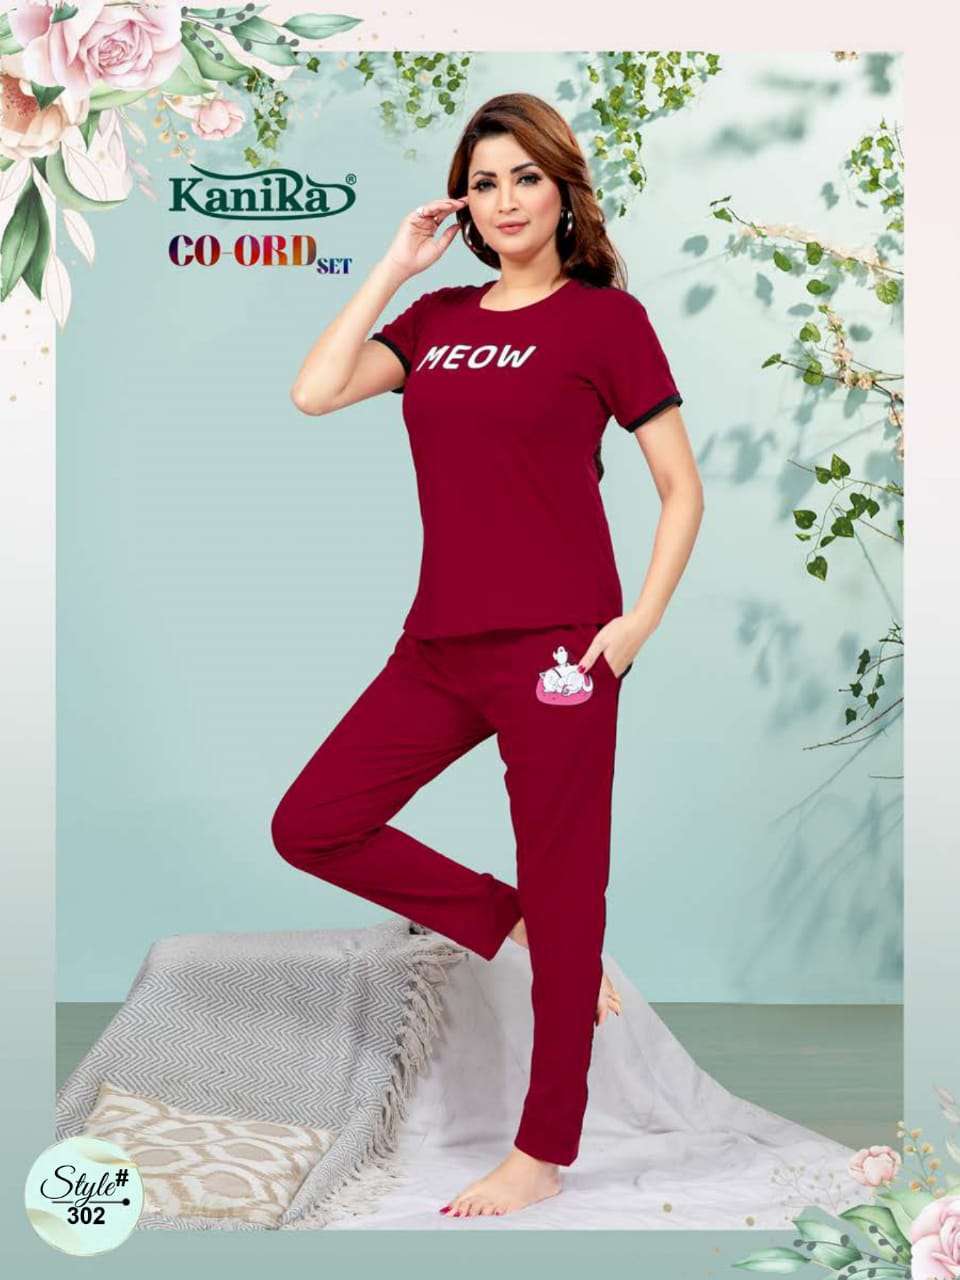 Kanika Co Ord Set 301 To 308 Night Suits Wholesaler of Night Suits in SURAT